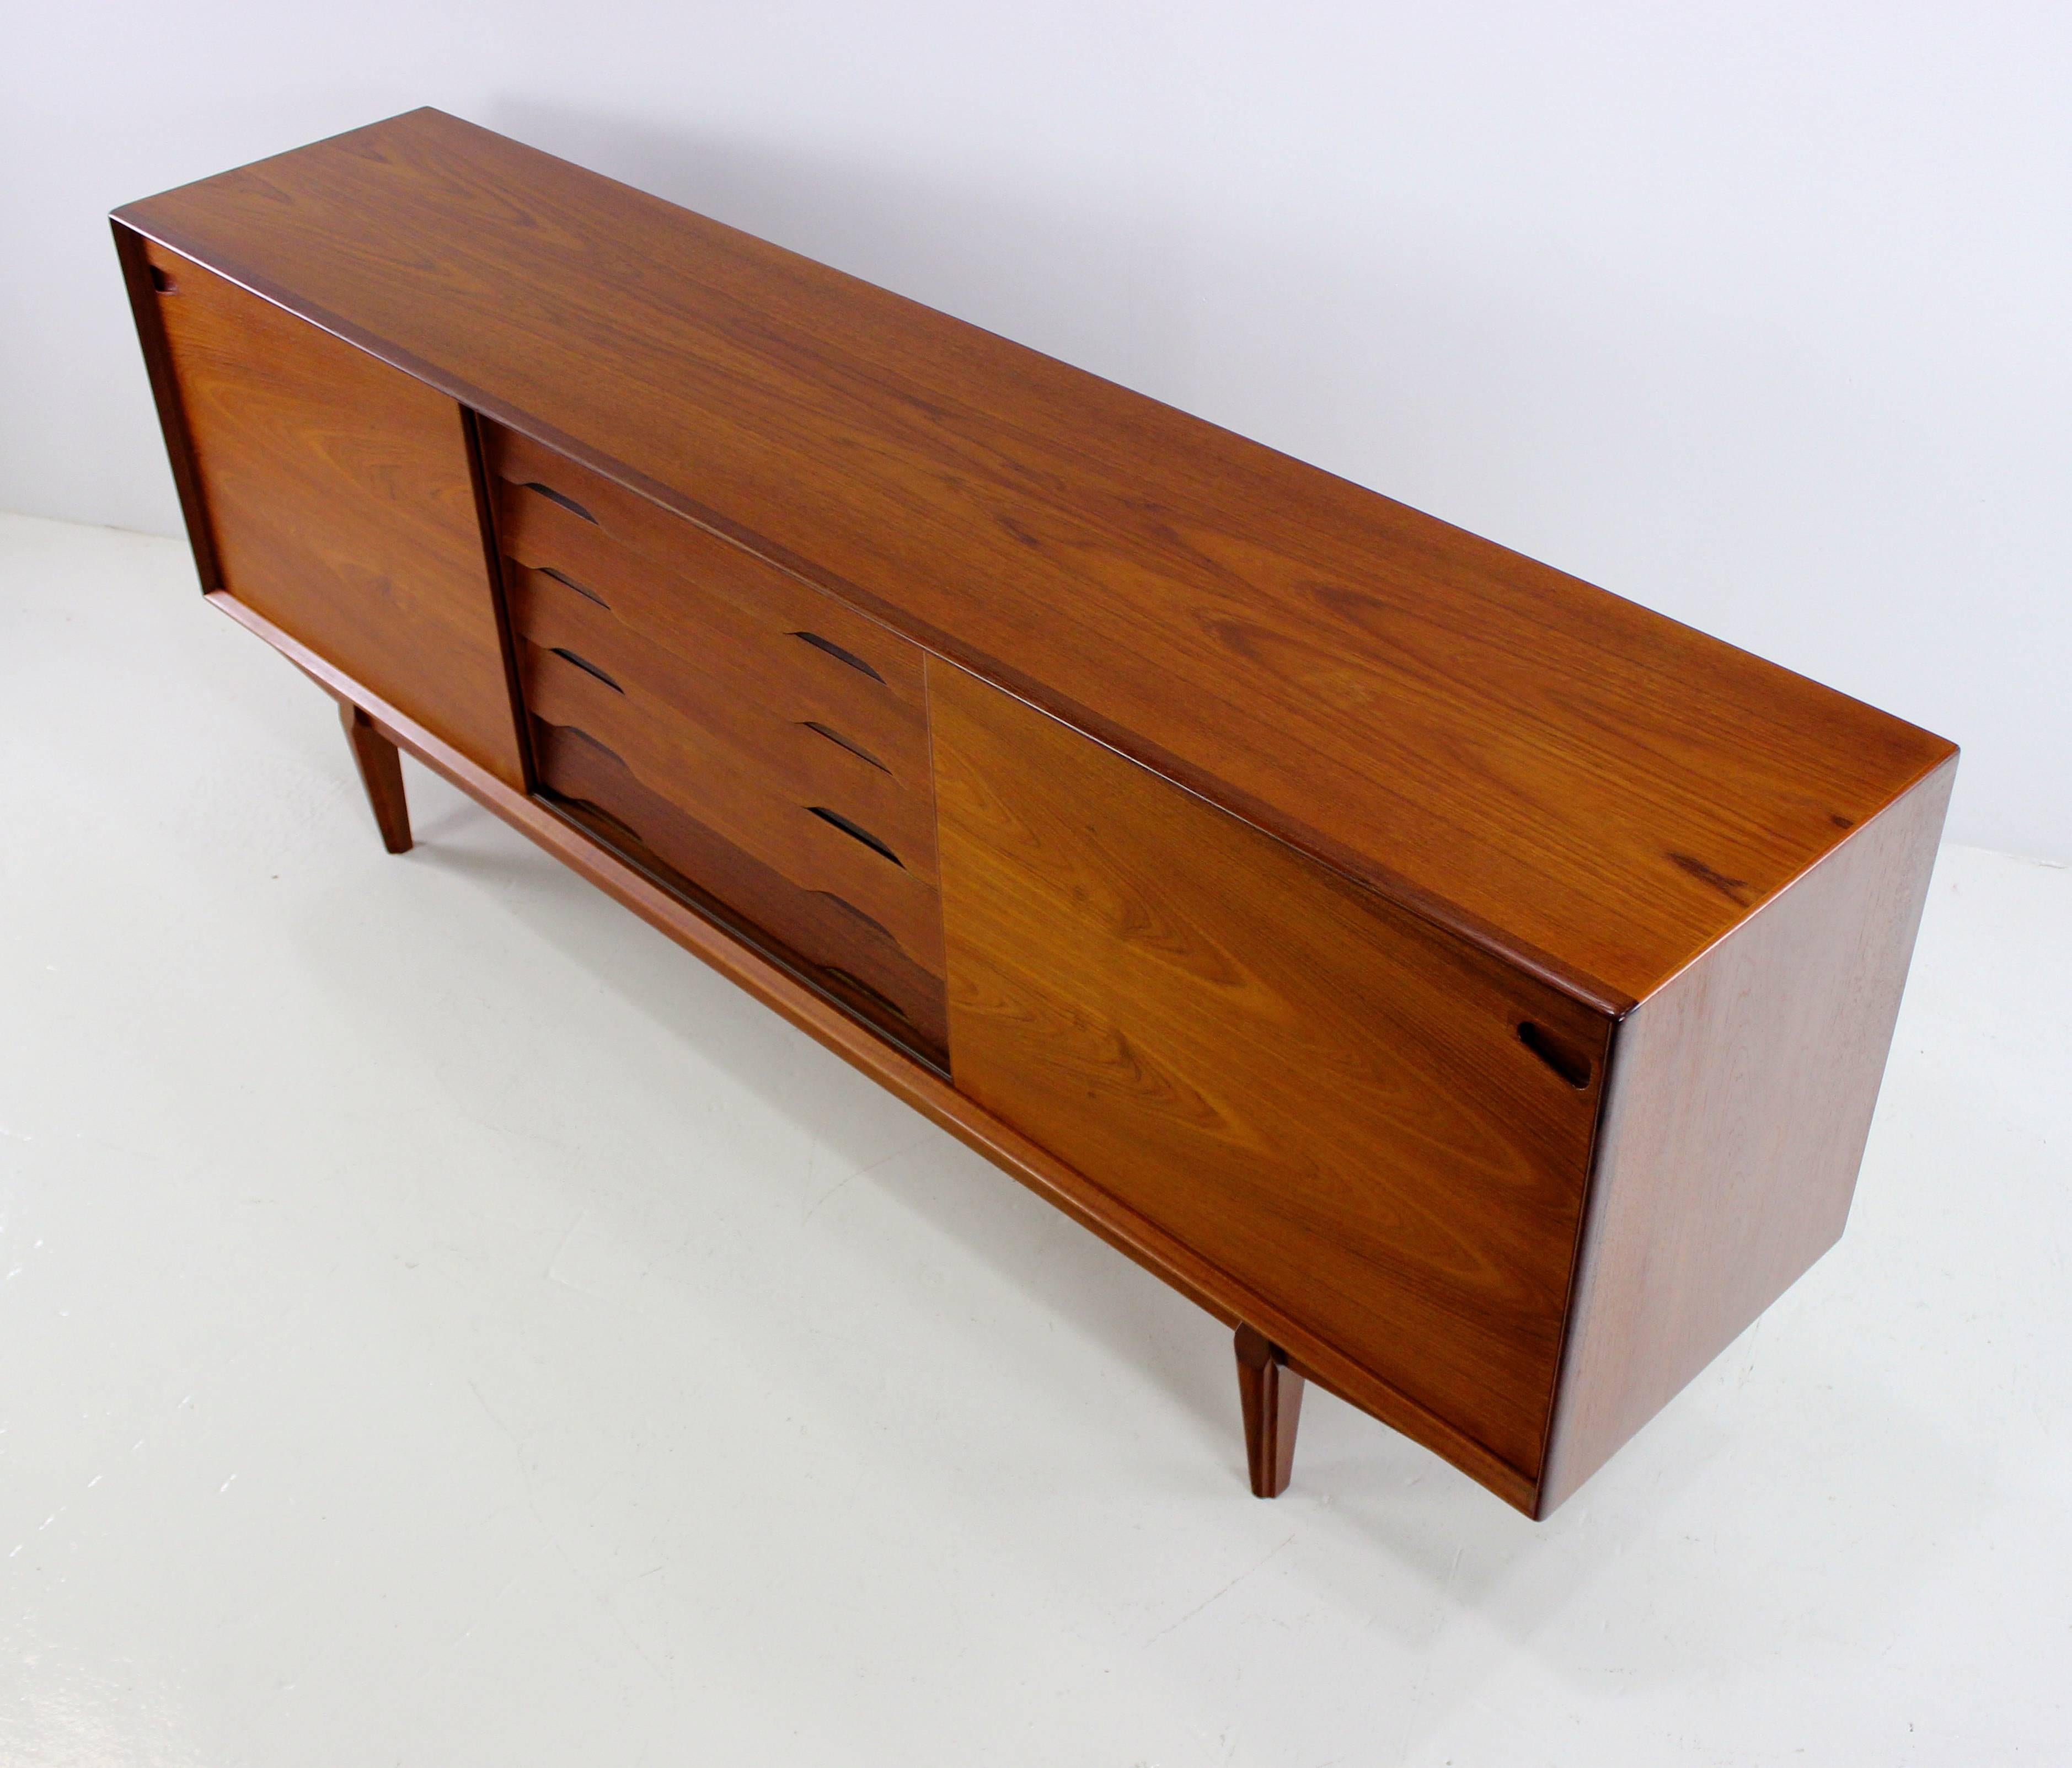 Danish modern credenza designed by Rosengren Hansen.
Rich teak with extraordinary book-matched grain.
Five drawers in the middle, the top drawer is felt lined.
Sliding doors open to adjustable shelving on each end.
Beautifully integrated door